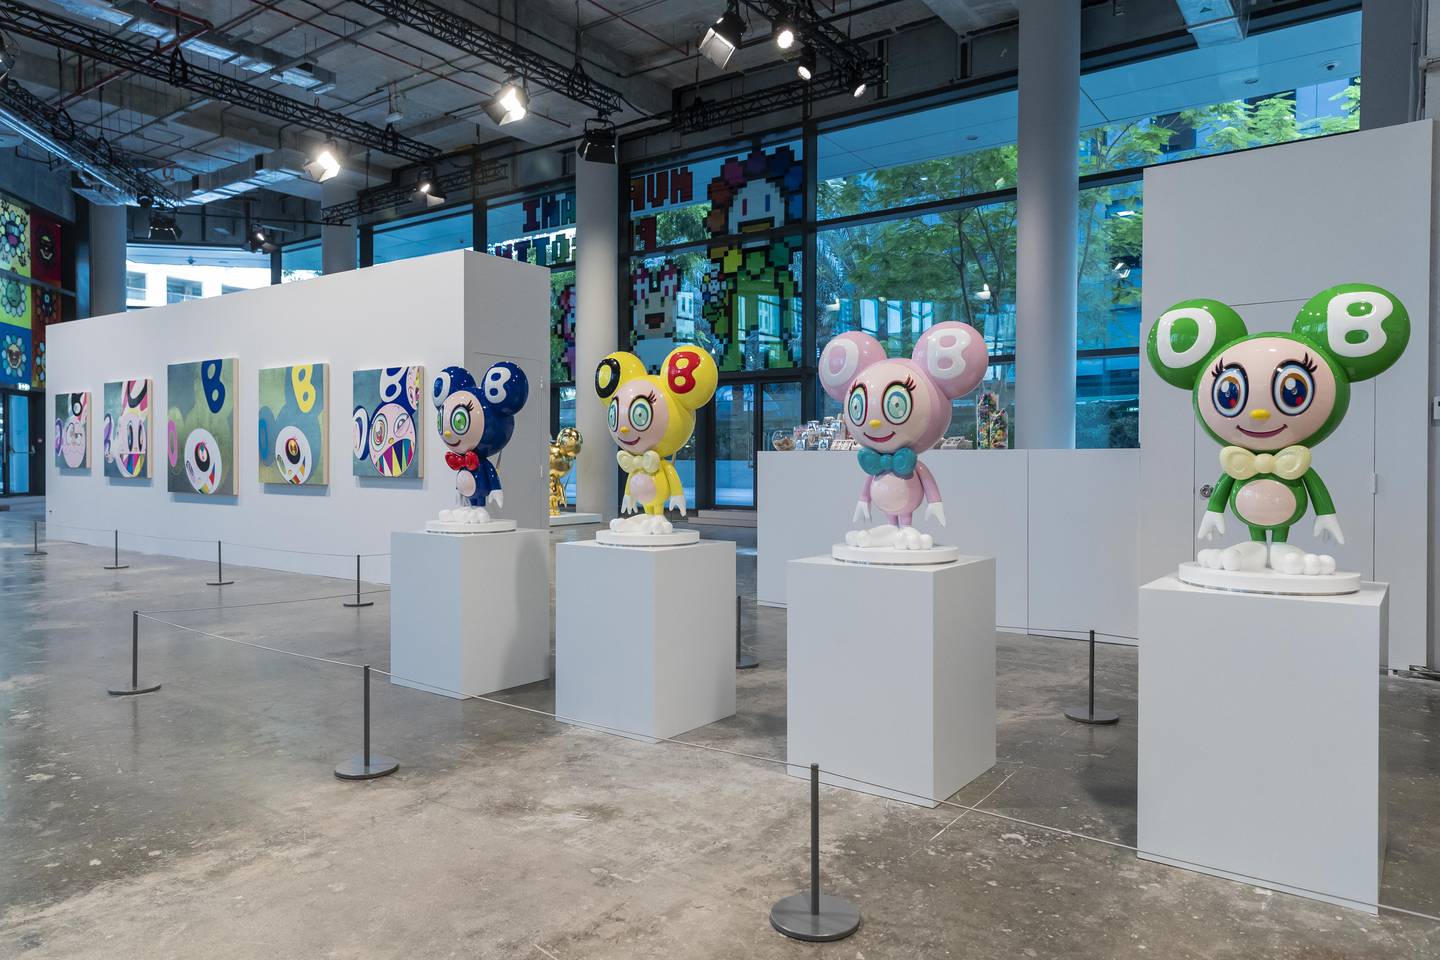 Takashi Murakami says the character Mr DOB began as a 'stupid Japanese pronunciation joke'. The character's left ear forms a D, face an O and right ear a B. Photo: Antonie Robertson / The National; 2022 TM/KK Co, Ltd; all rights reserved